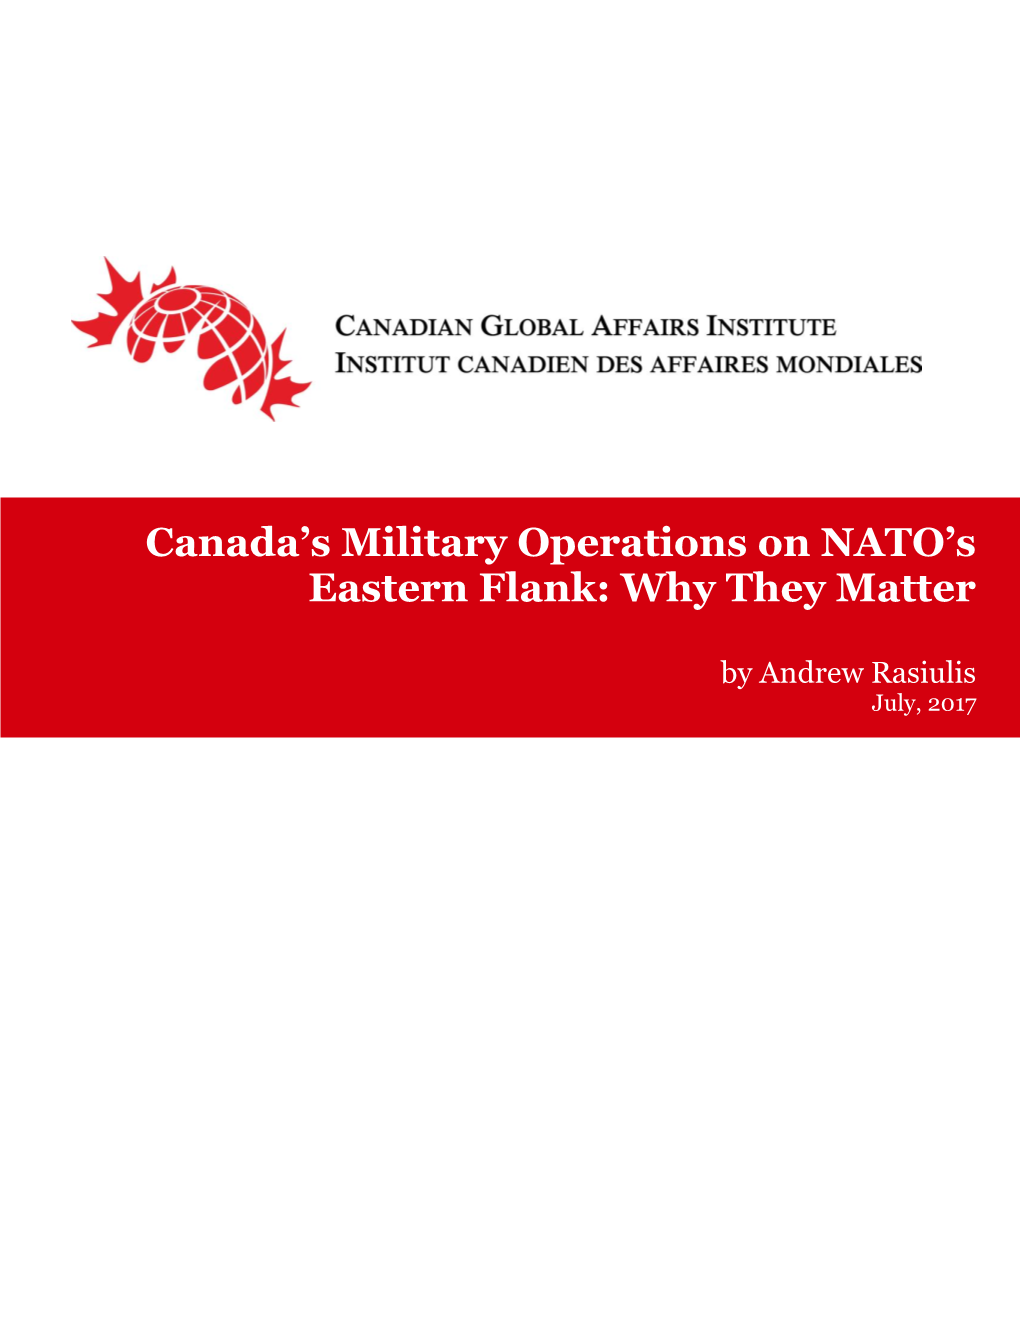 Canada's Military Operations on NATO's Eastern Flank